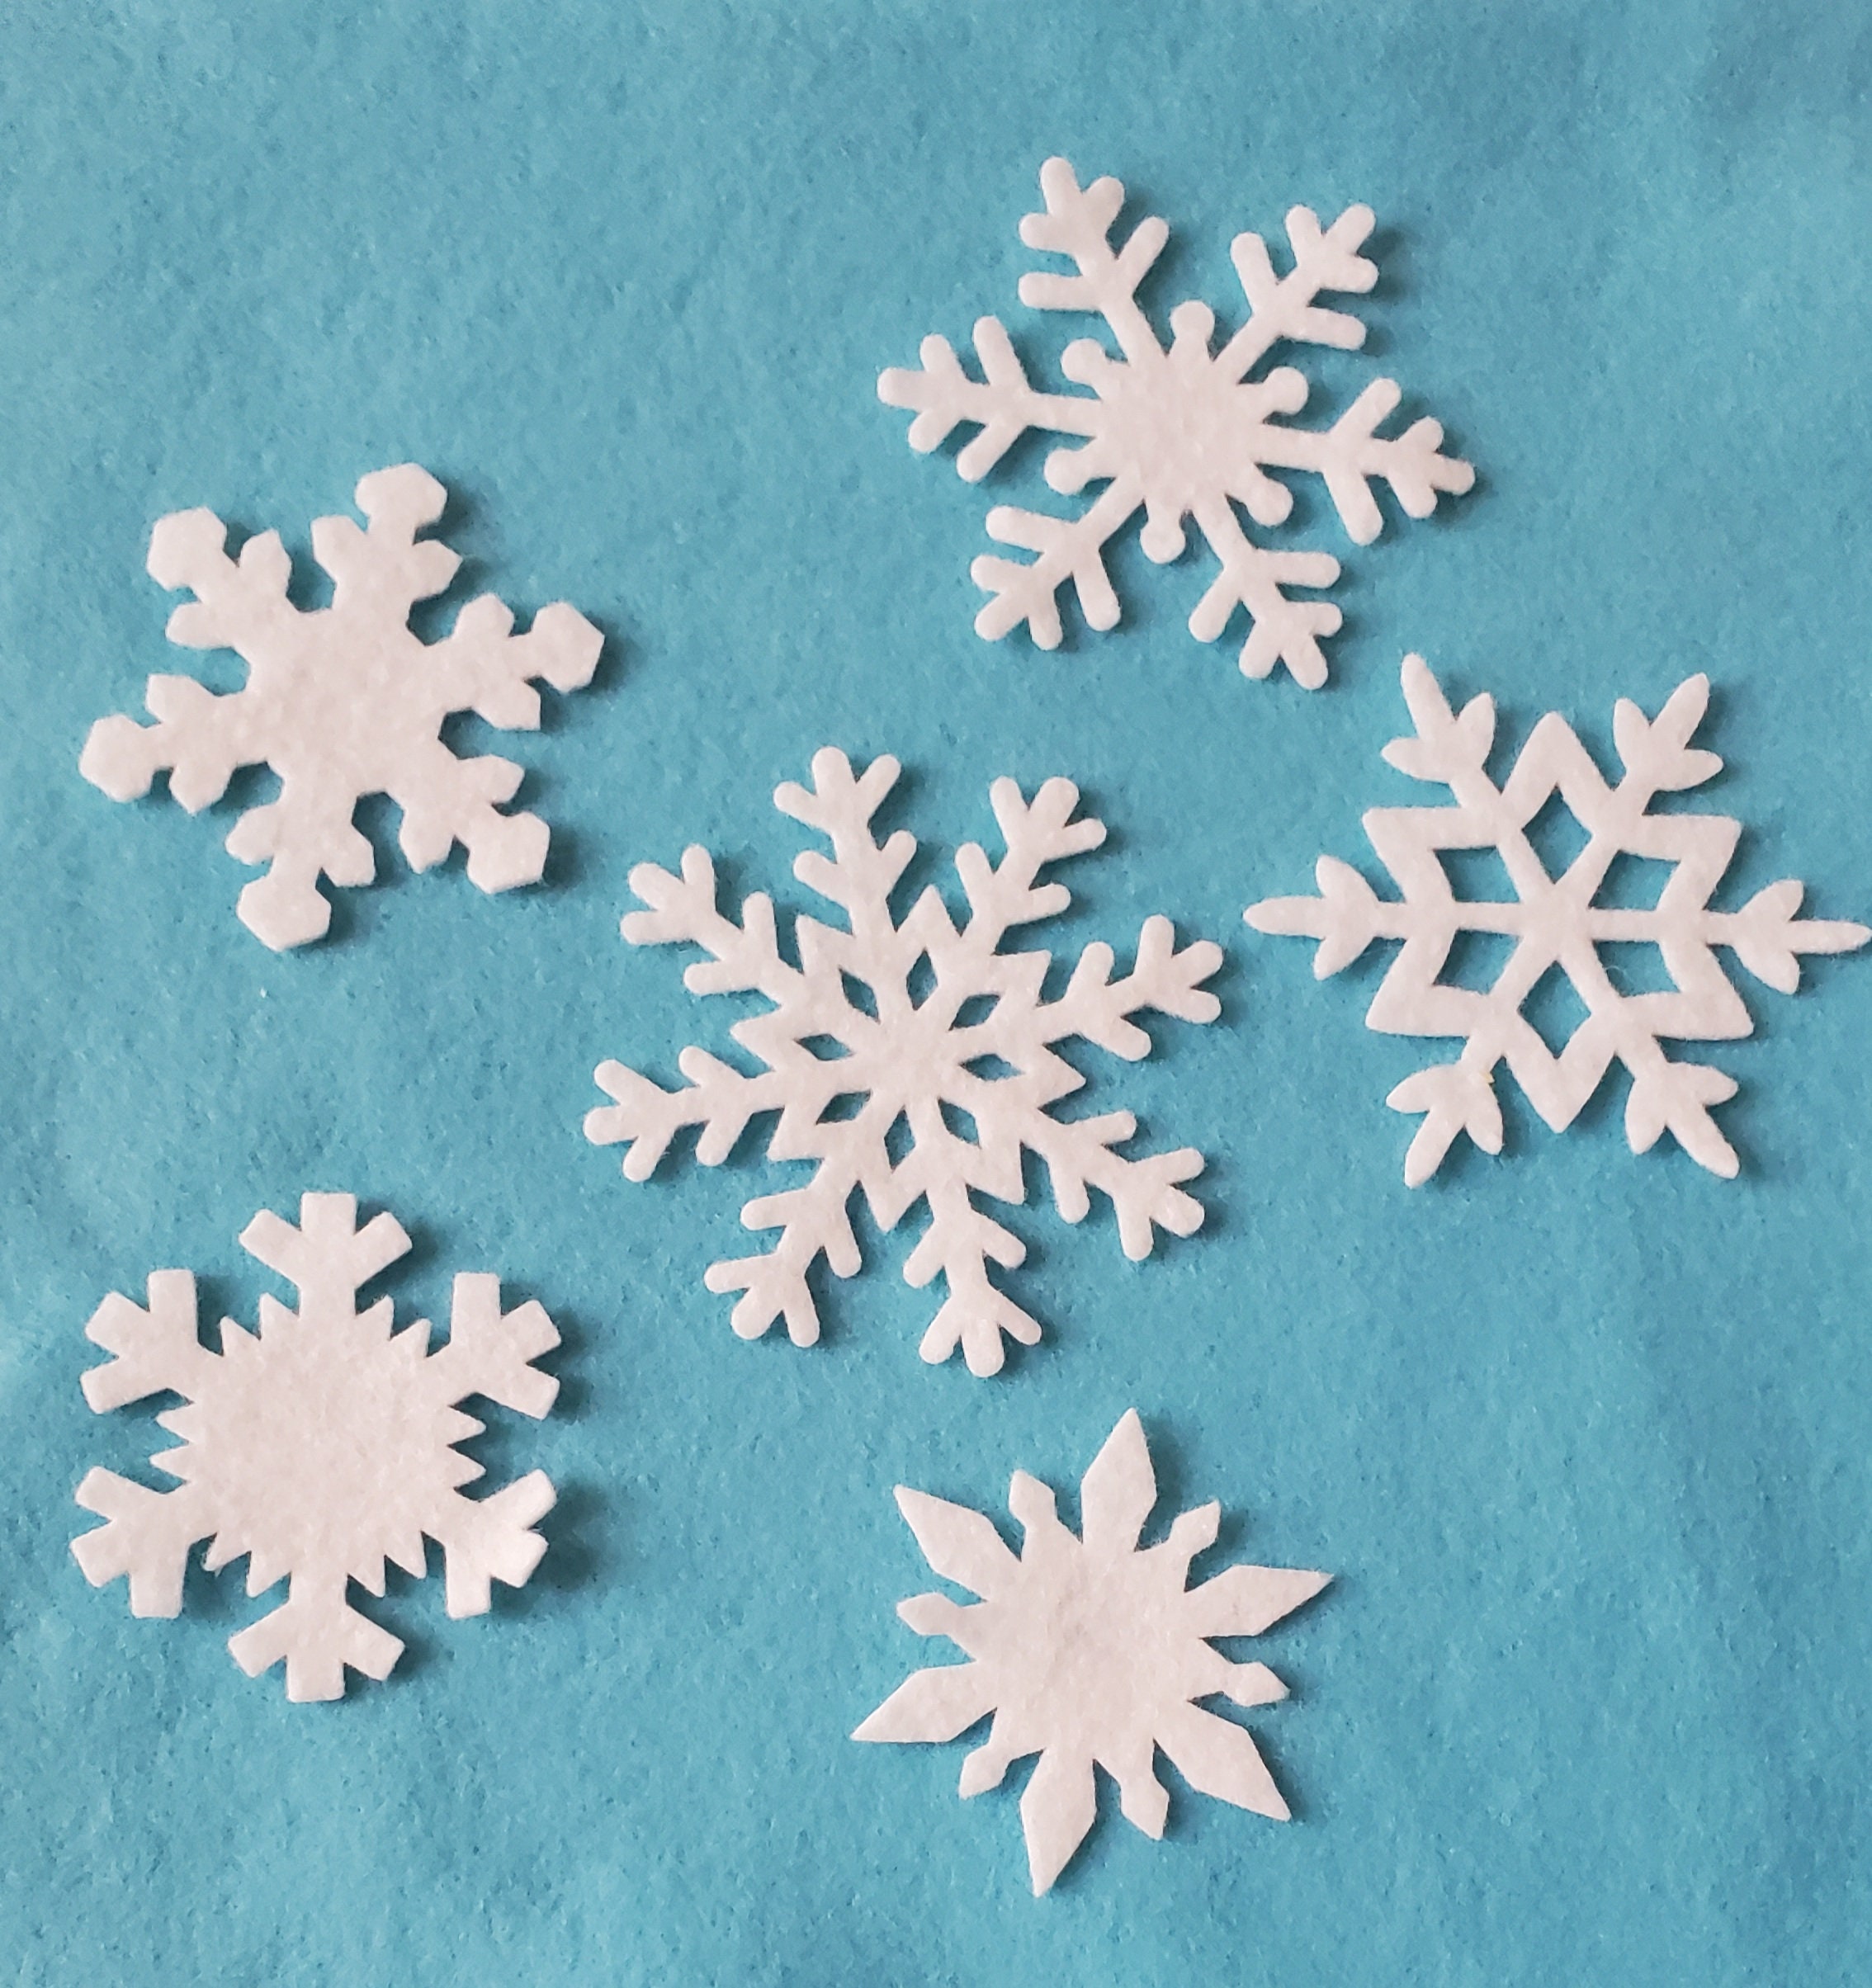 Felt Snowflakes 16” Across With Sparkle Tips For $3 In Appleton